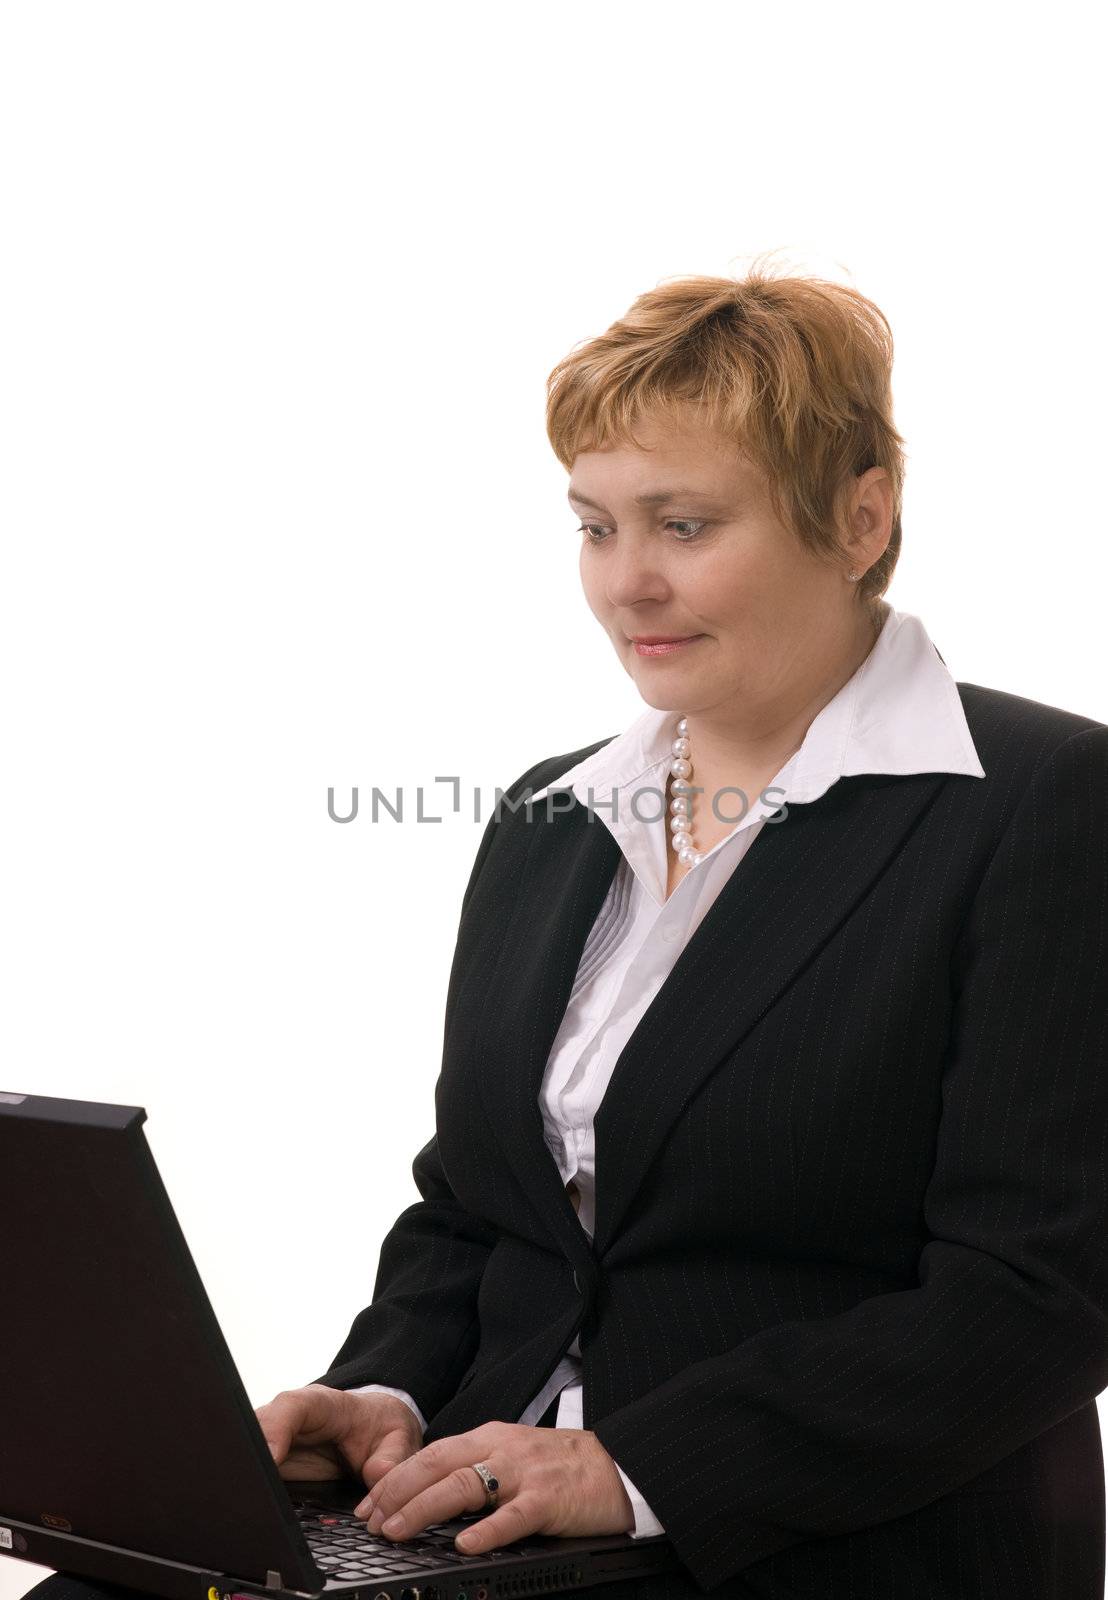 Mature businesswoman searching internet on her laptop computer